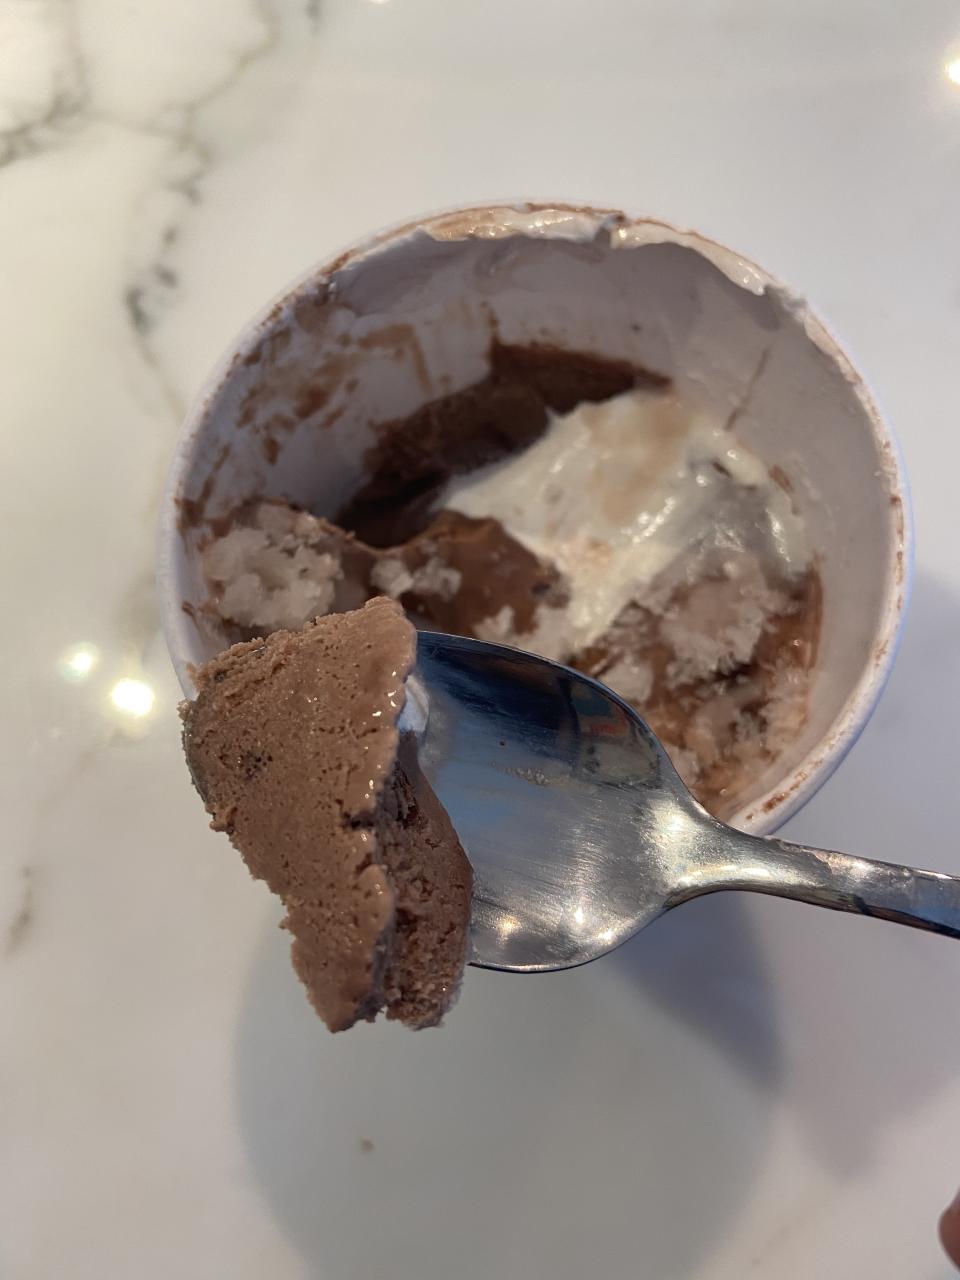 This picture shows a pint that's already half gone, so the elements of the ice cream are running together, but the whipped cream looks like marshmallow